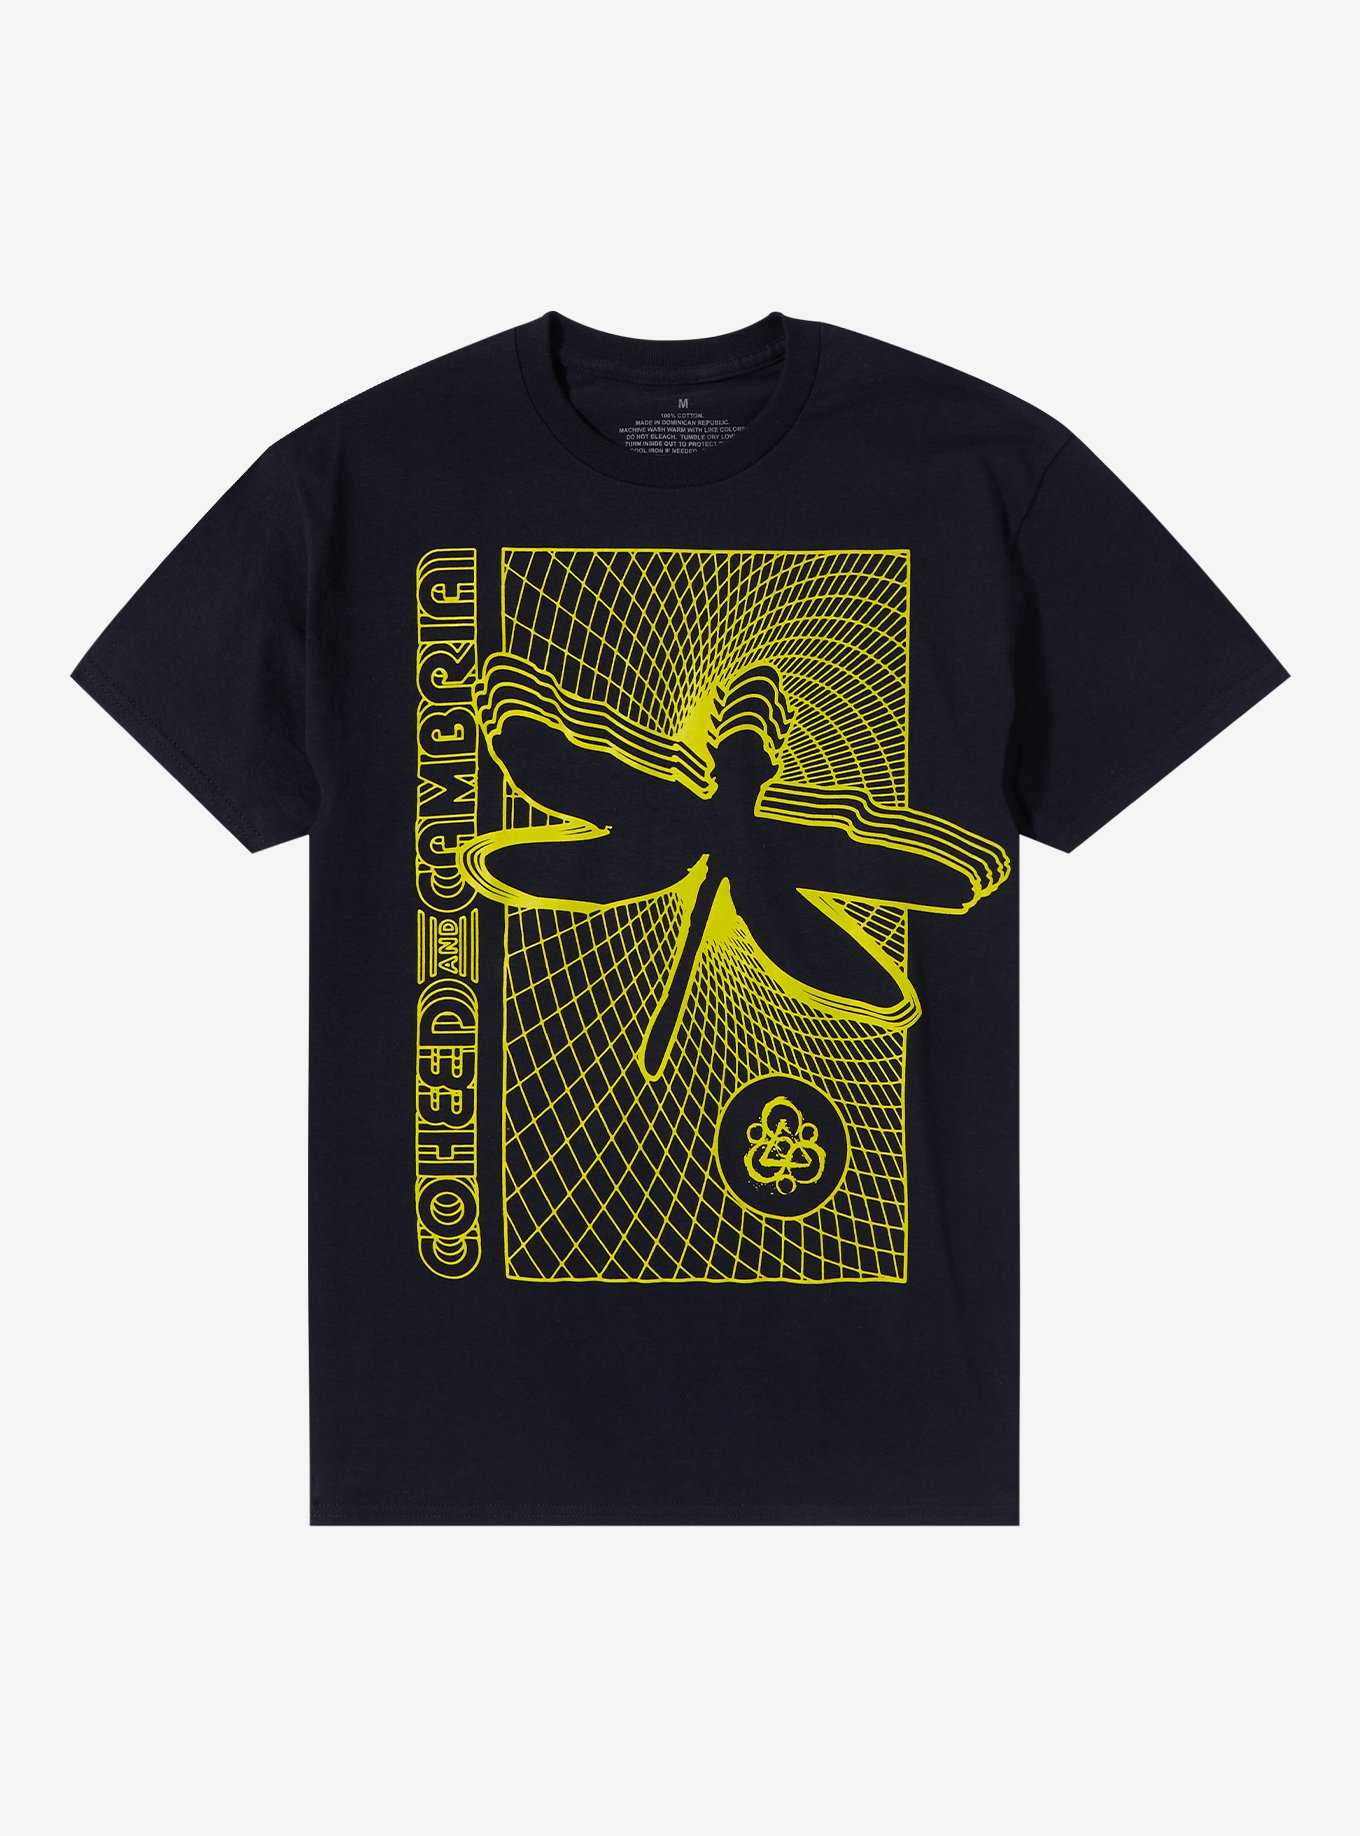 Coheed & Cambria Dragonfly Boyfriend Fit Girls T-Shirt, , hi-res